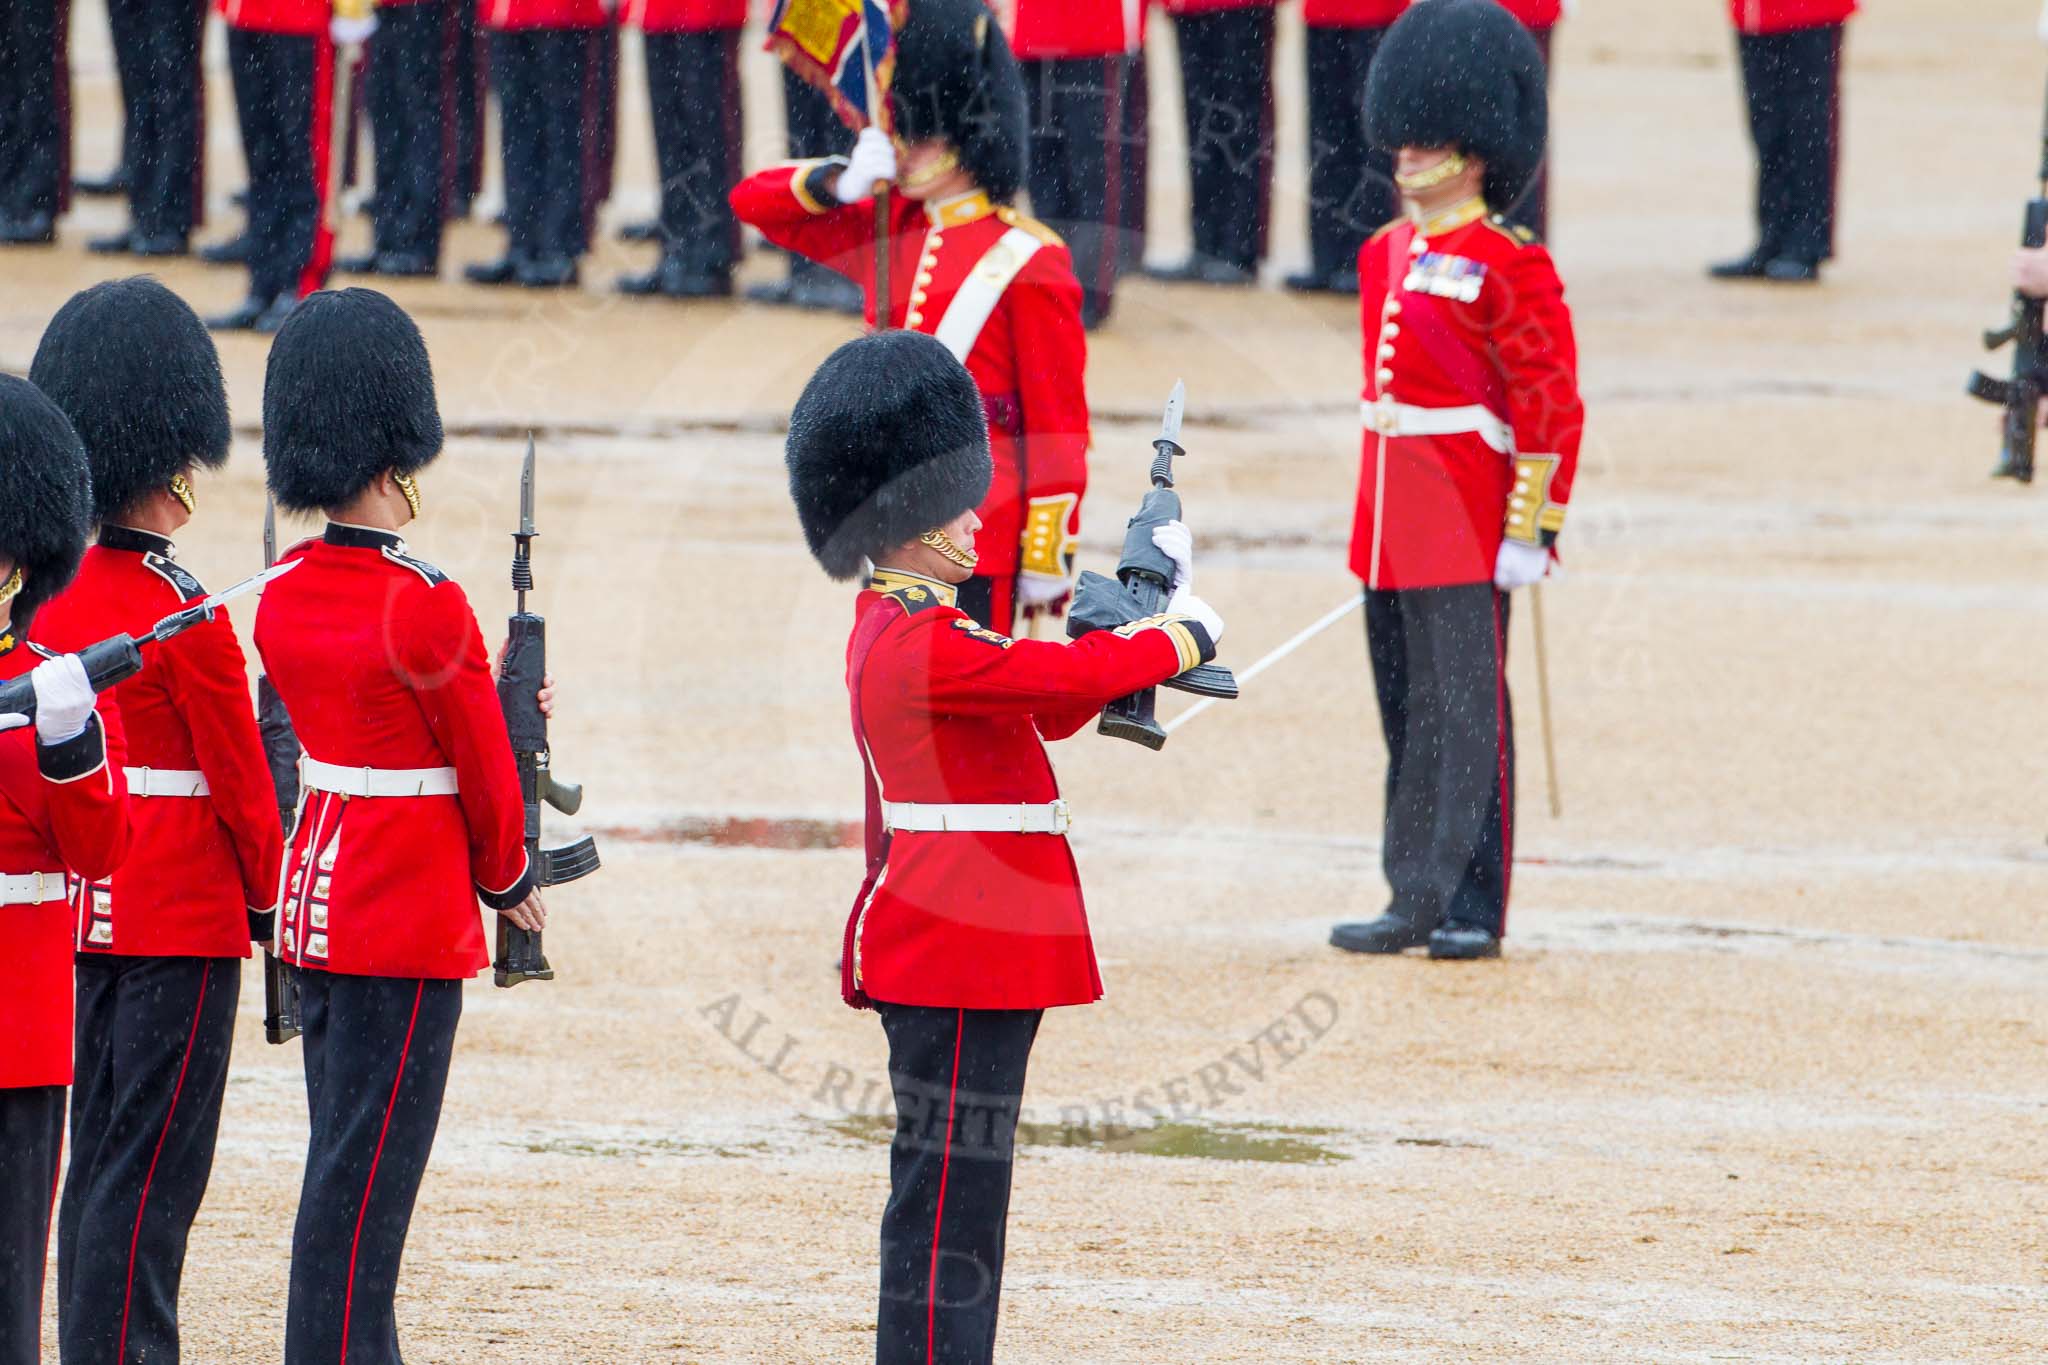 The Colonel's Review 2014.
Horse Guards Parade, Westminster,
London,

United Kingdom,
on 07 June 2014 at 11:20, image #403